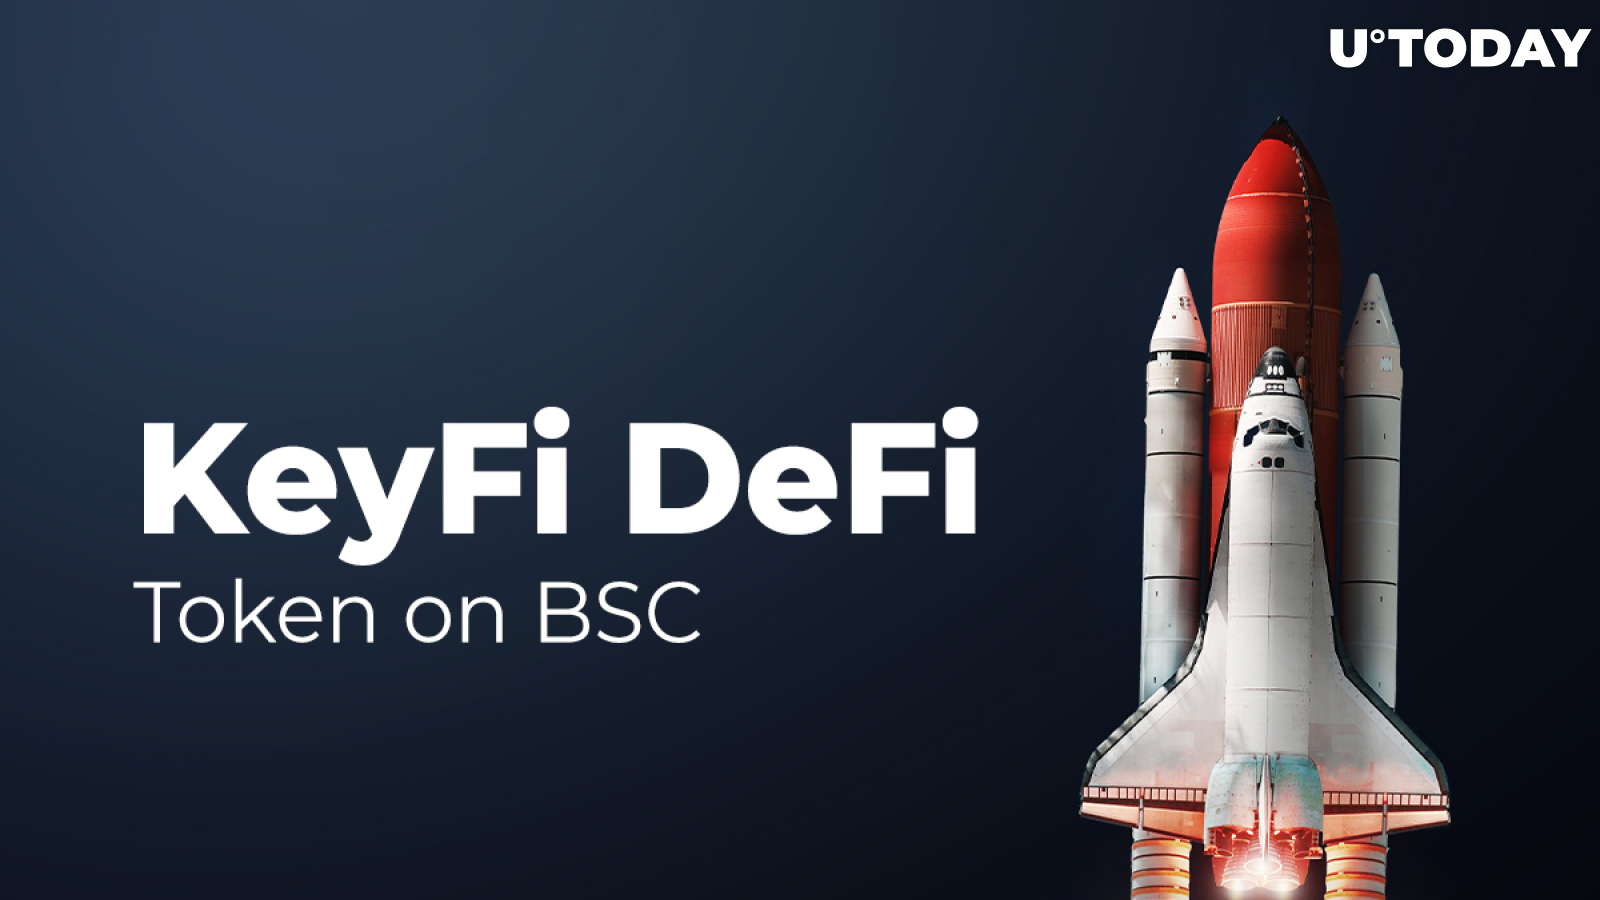 KeyFi DeFi Platform Launches Token on BSC, Teases Pro Application Release